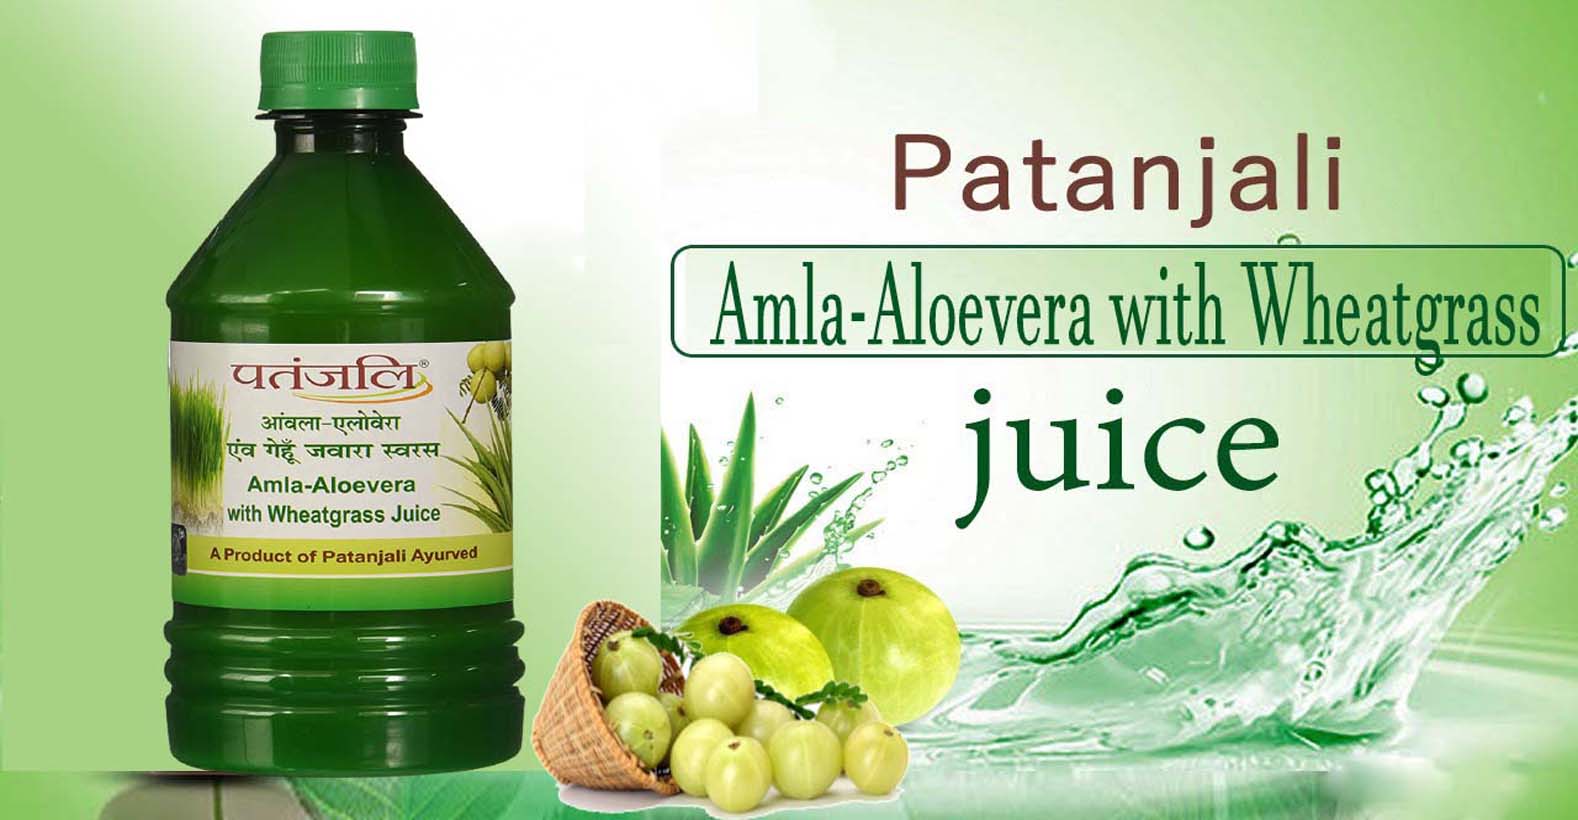 Patanjali Amla Aloevera With Wheat Grass Juice - Ingredients, Composition, Properties, Health Benefits, Usage